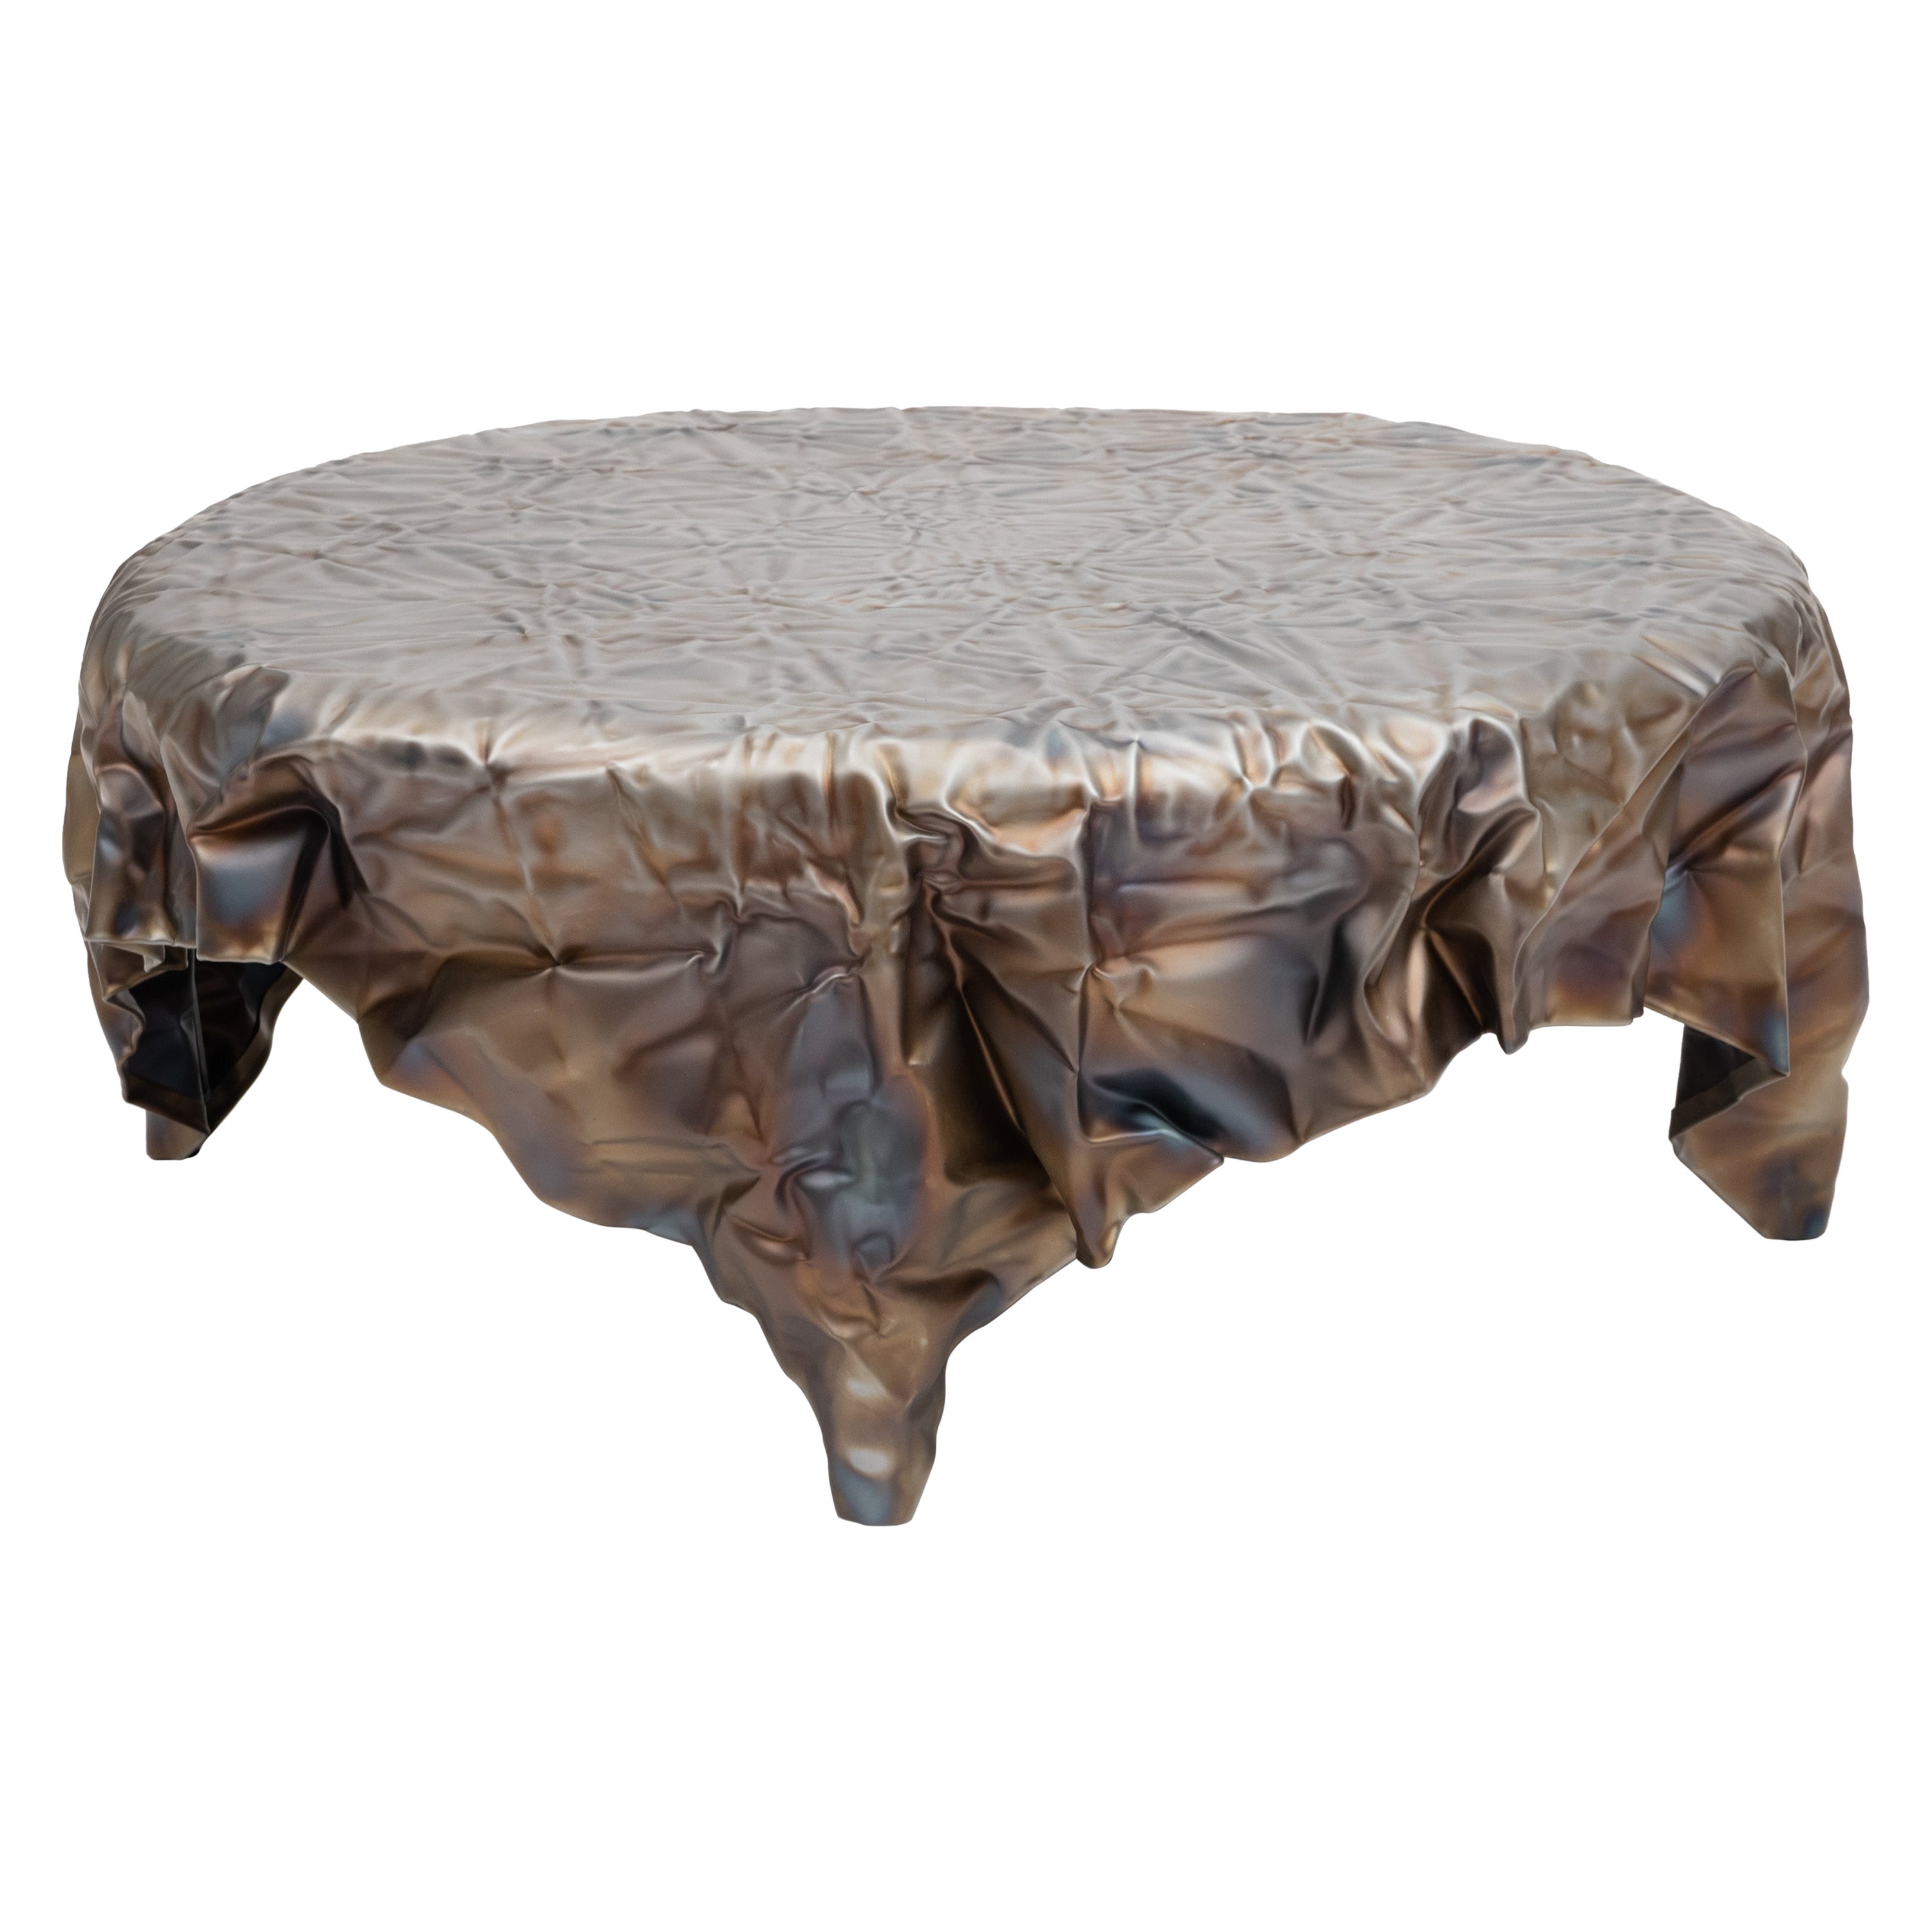 Christopher Prinz “Wrinkled Coffee Table” in a Raw Heat Gradient Finish